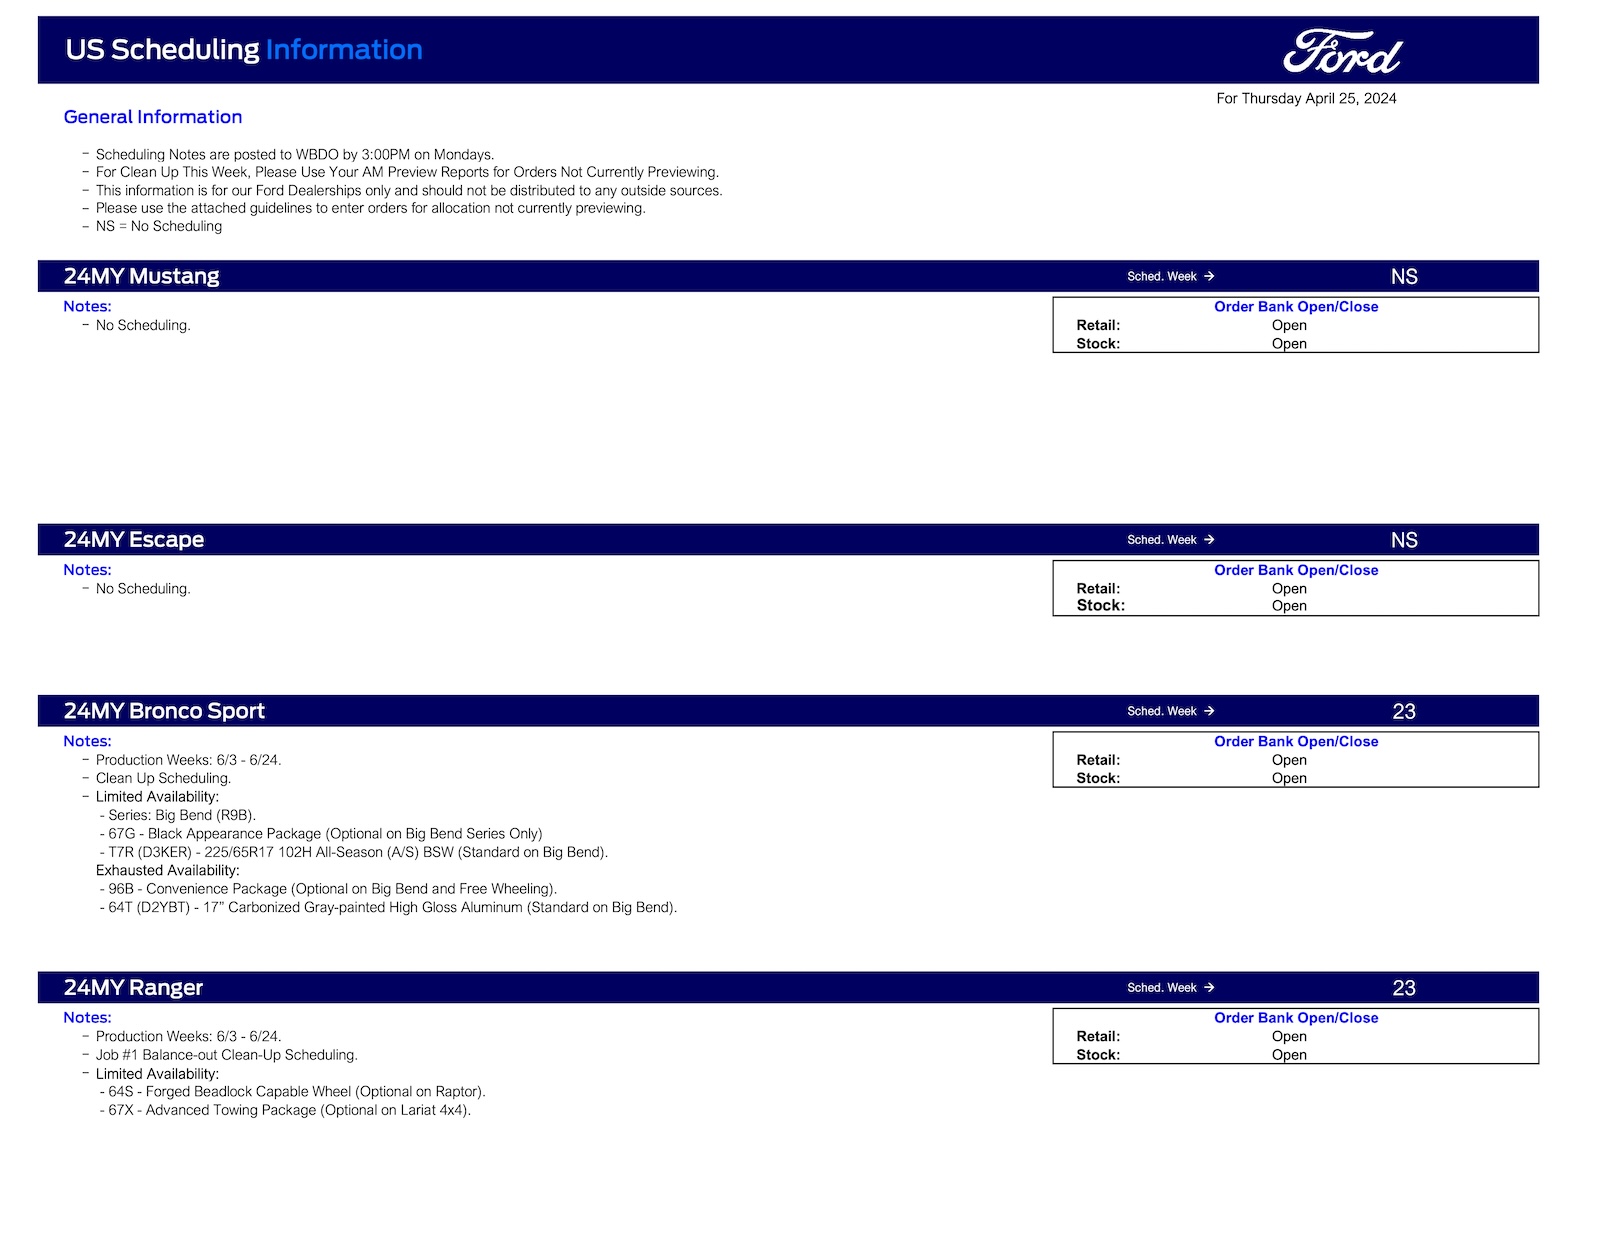 S650 Mustang 2024 Mustang No Scheduling This Week (4/24/25) Ford Scheduling Notes - 4.22.24-1